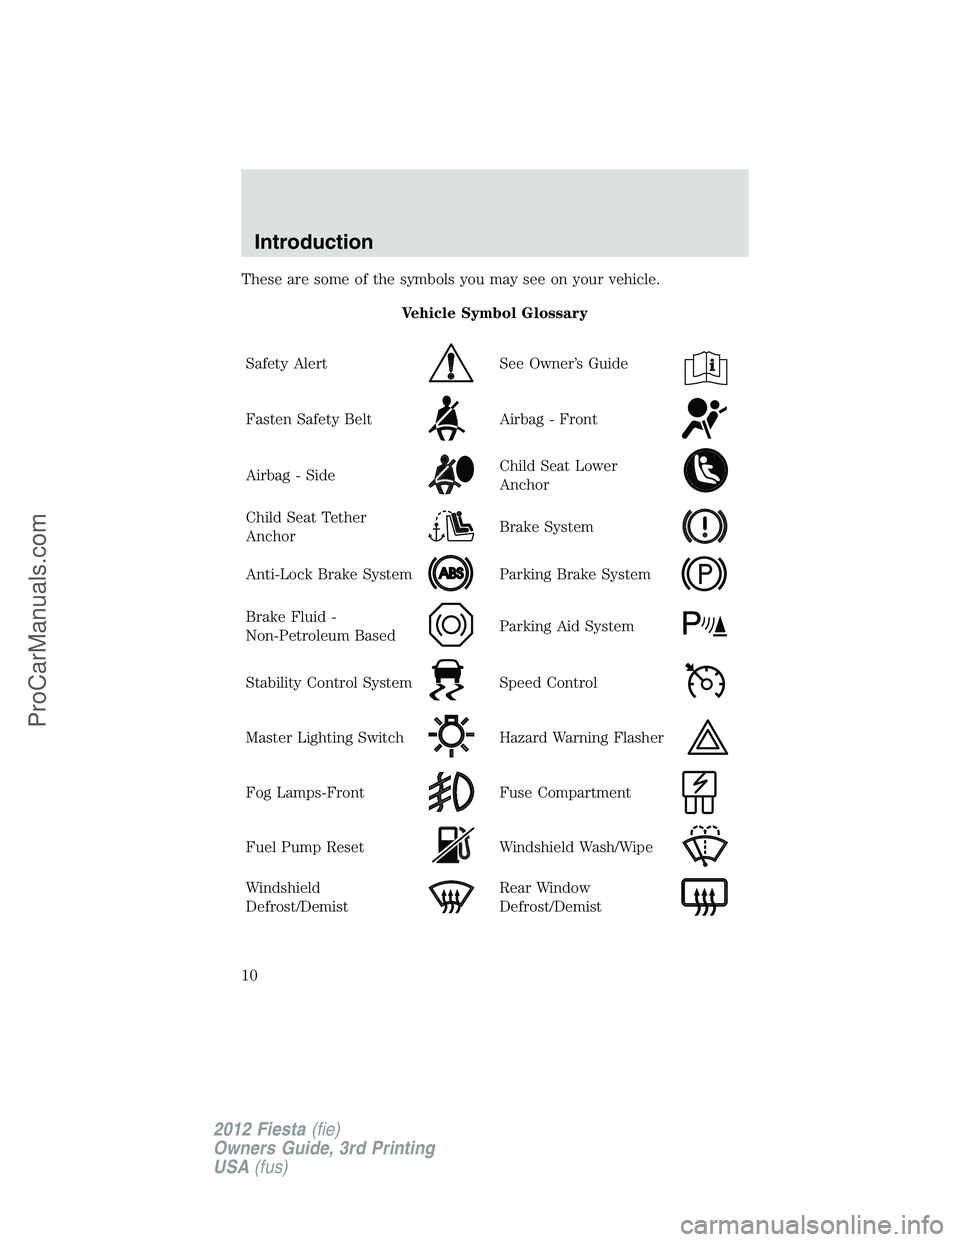 FORD FIESTA 2012  Owners Manual These are some of the symbols you may see on your vehicle.
Vehicle Symbol Glossary
Safety Alert
See Owner’s Guide
Fasten Safety BeltAirbag - Front
Airbag - SideChild Seat Lower
Anchor
Child Seat Tet